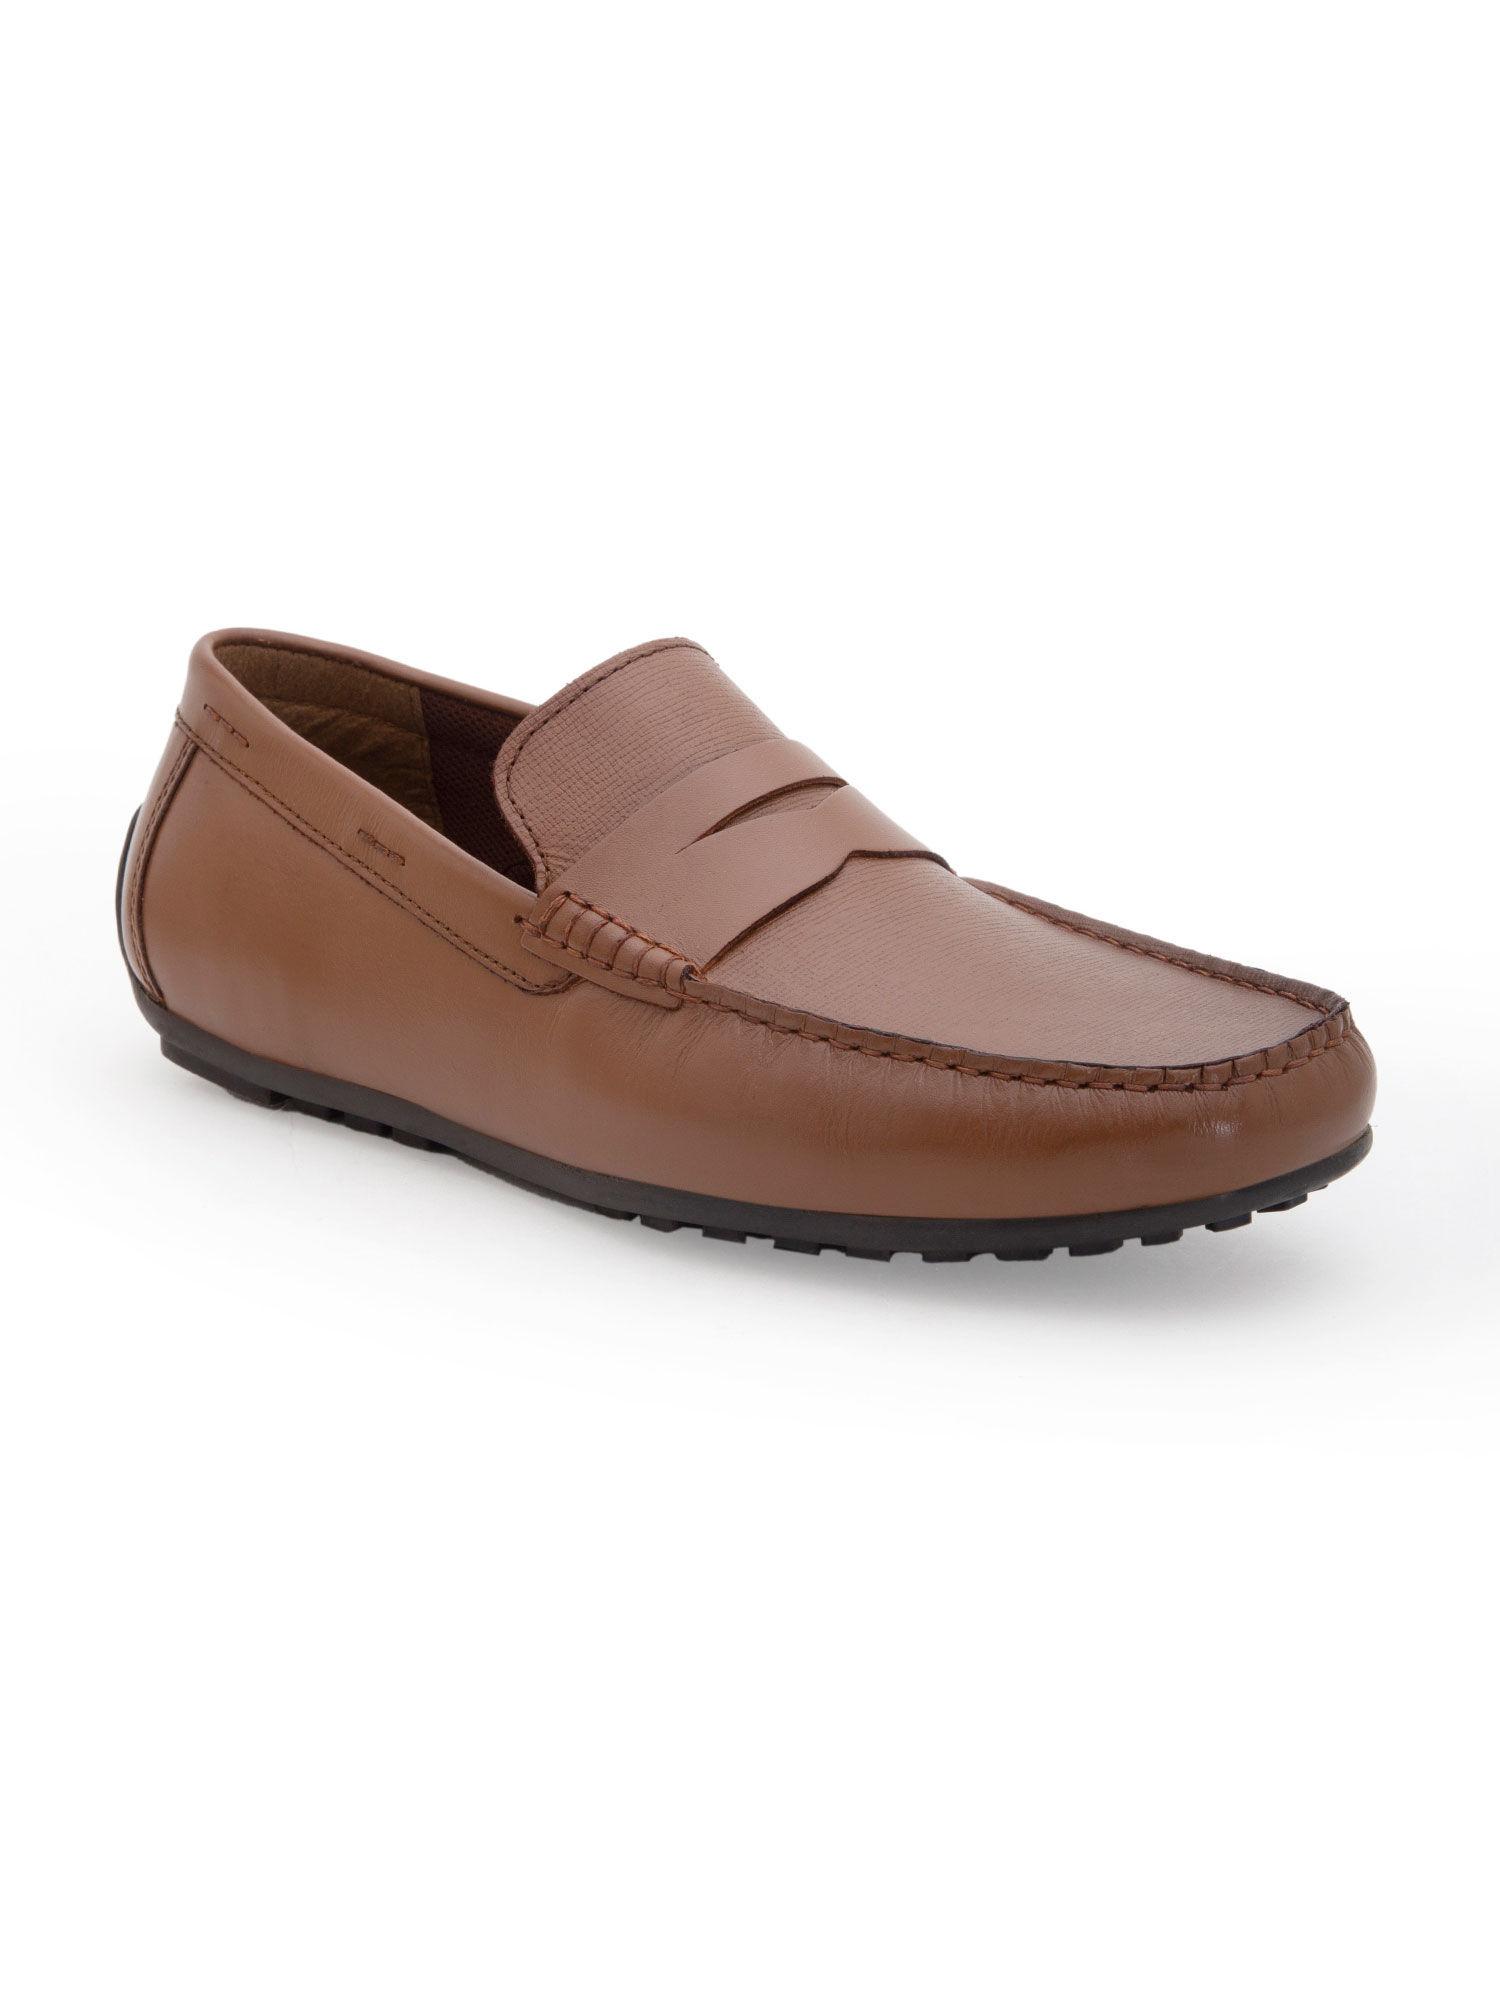 solid tan slip-on dress shoes